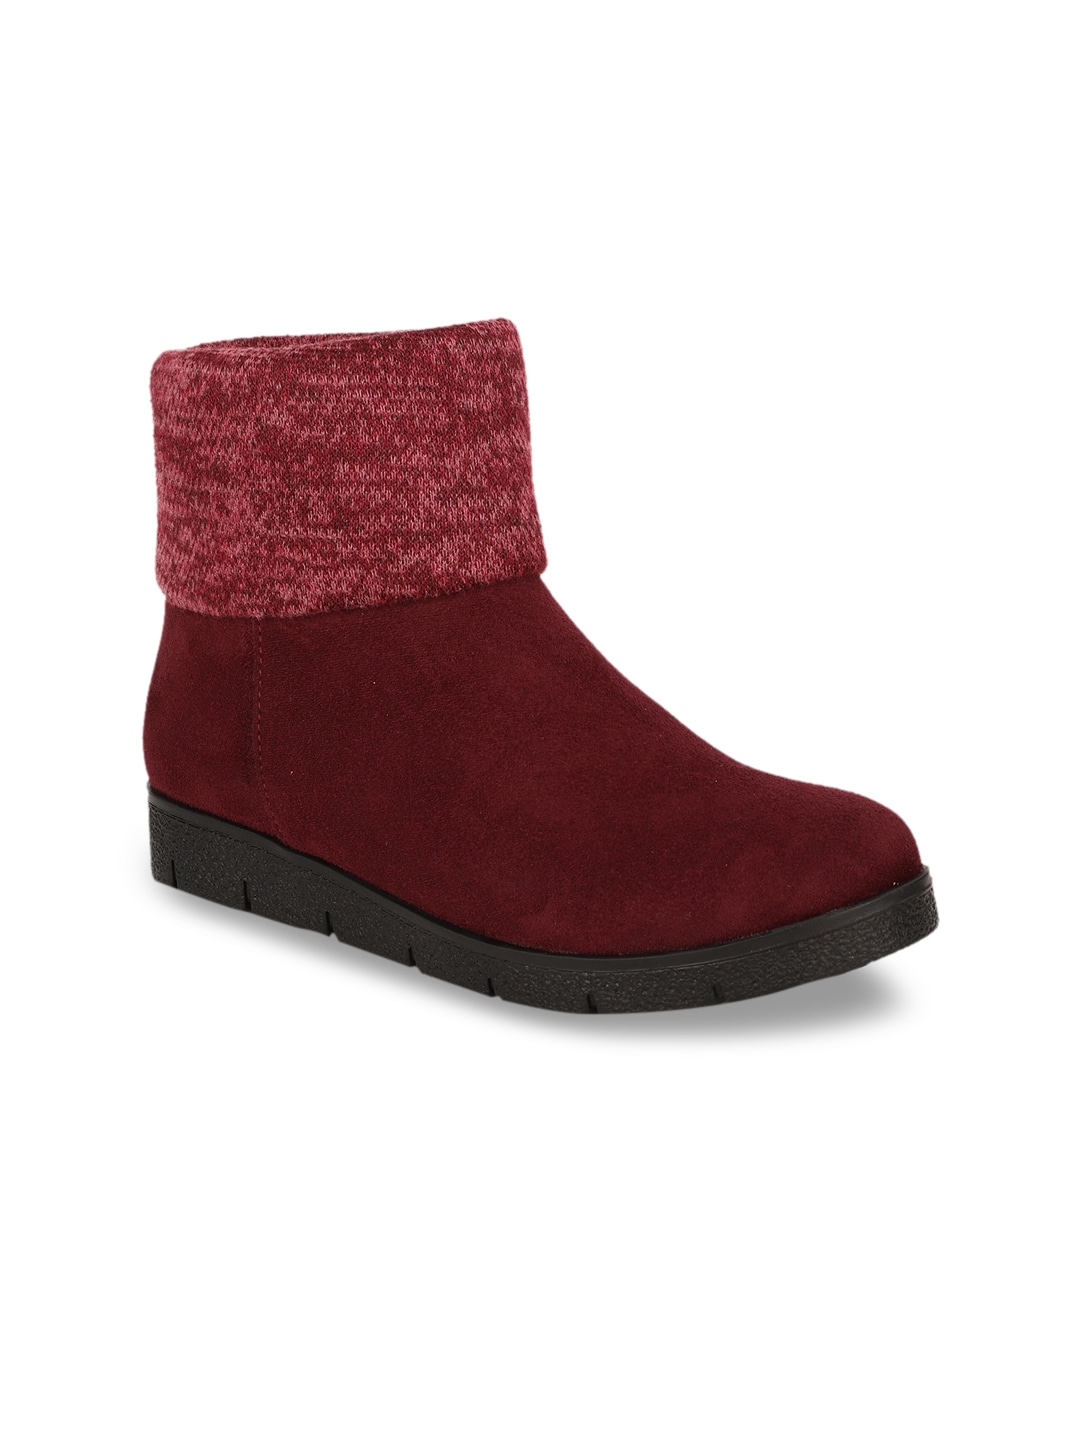 Bruno Manetti Maroon Mid-Top Suede Flatform Heeled Boots Price in India